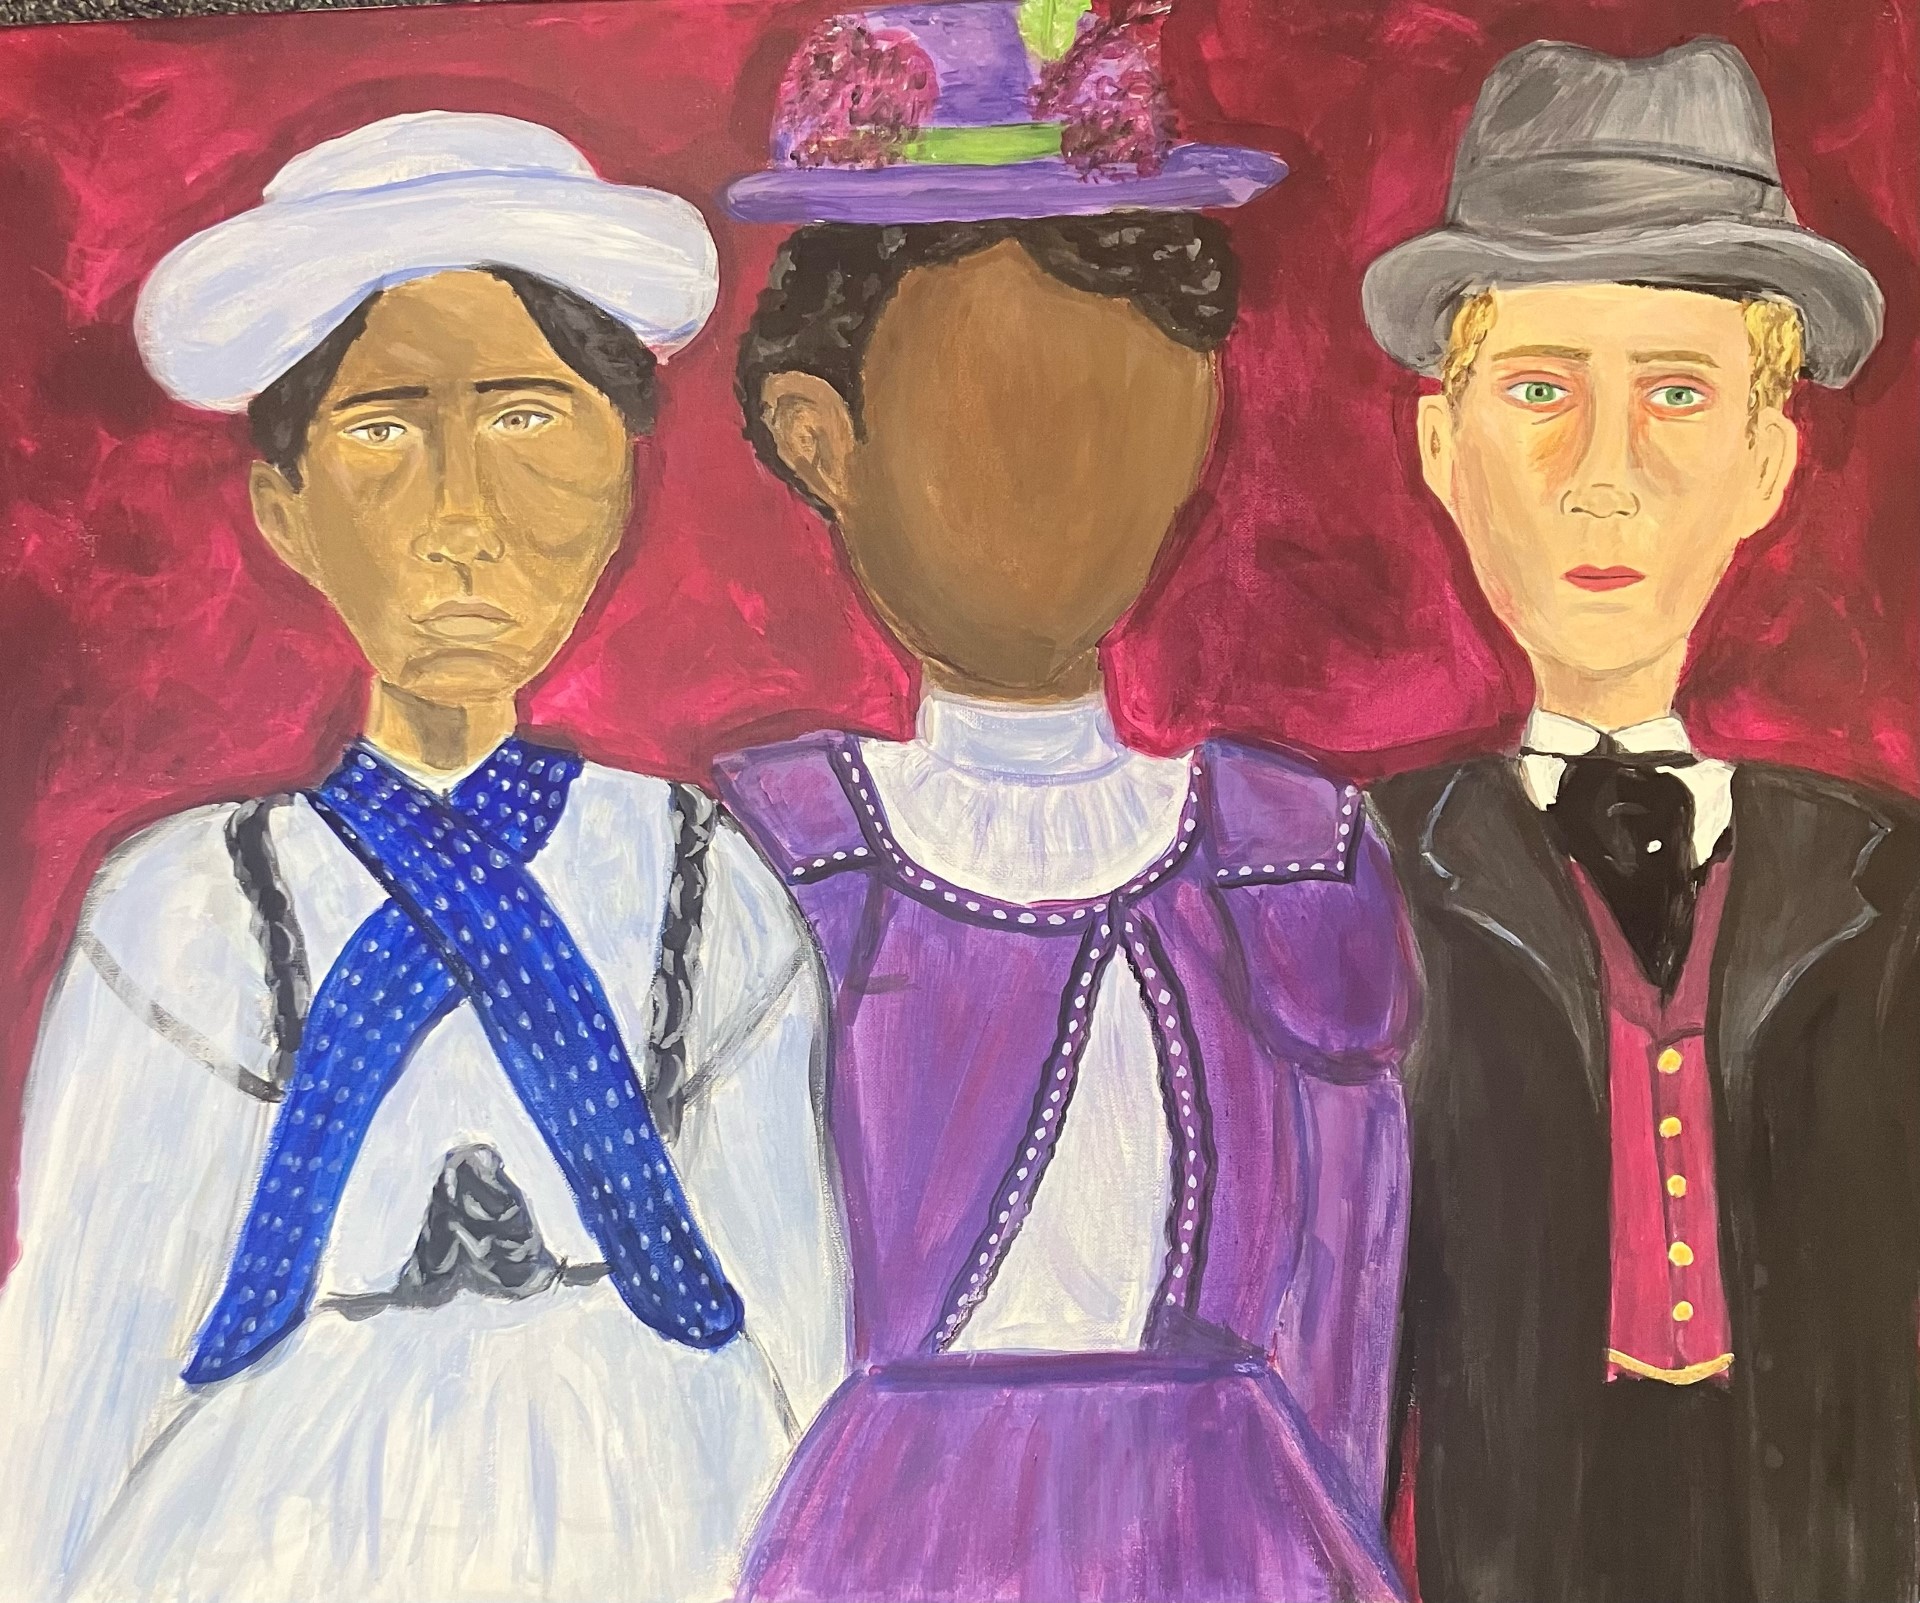 Painting of three trans individuals in 19th century clothing with the middle person faceless